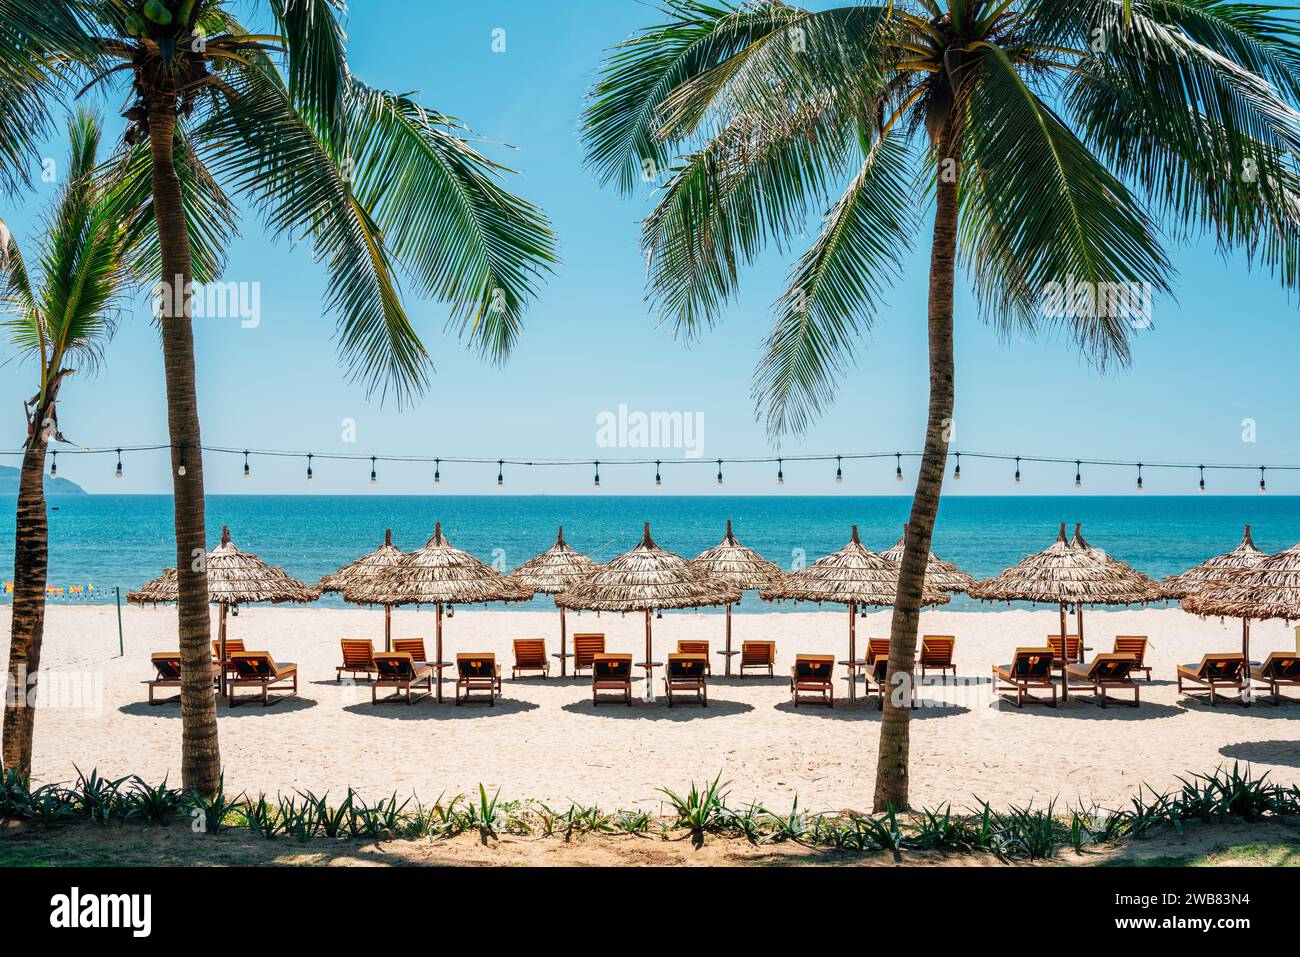 My Khe Beach with parasol and sunbed in Da Nang, Vietnam Stock Photo